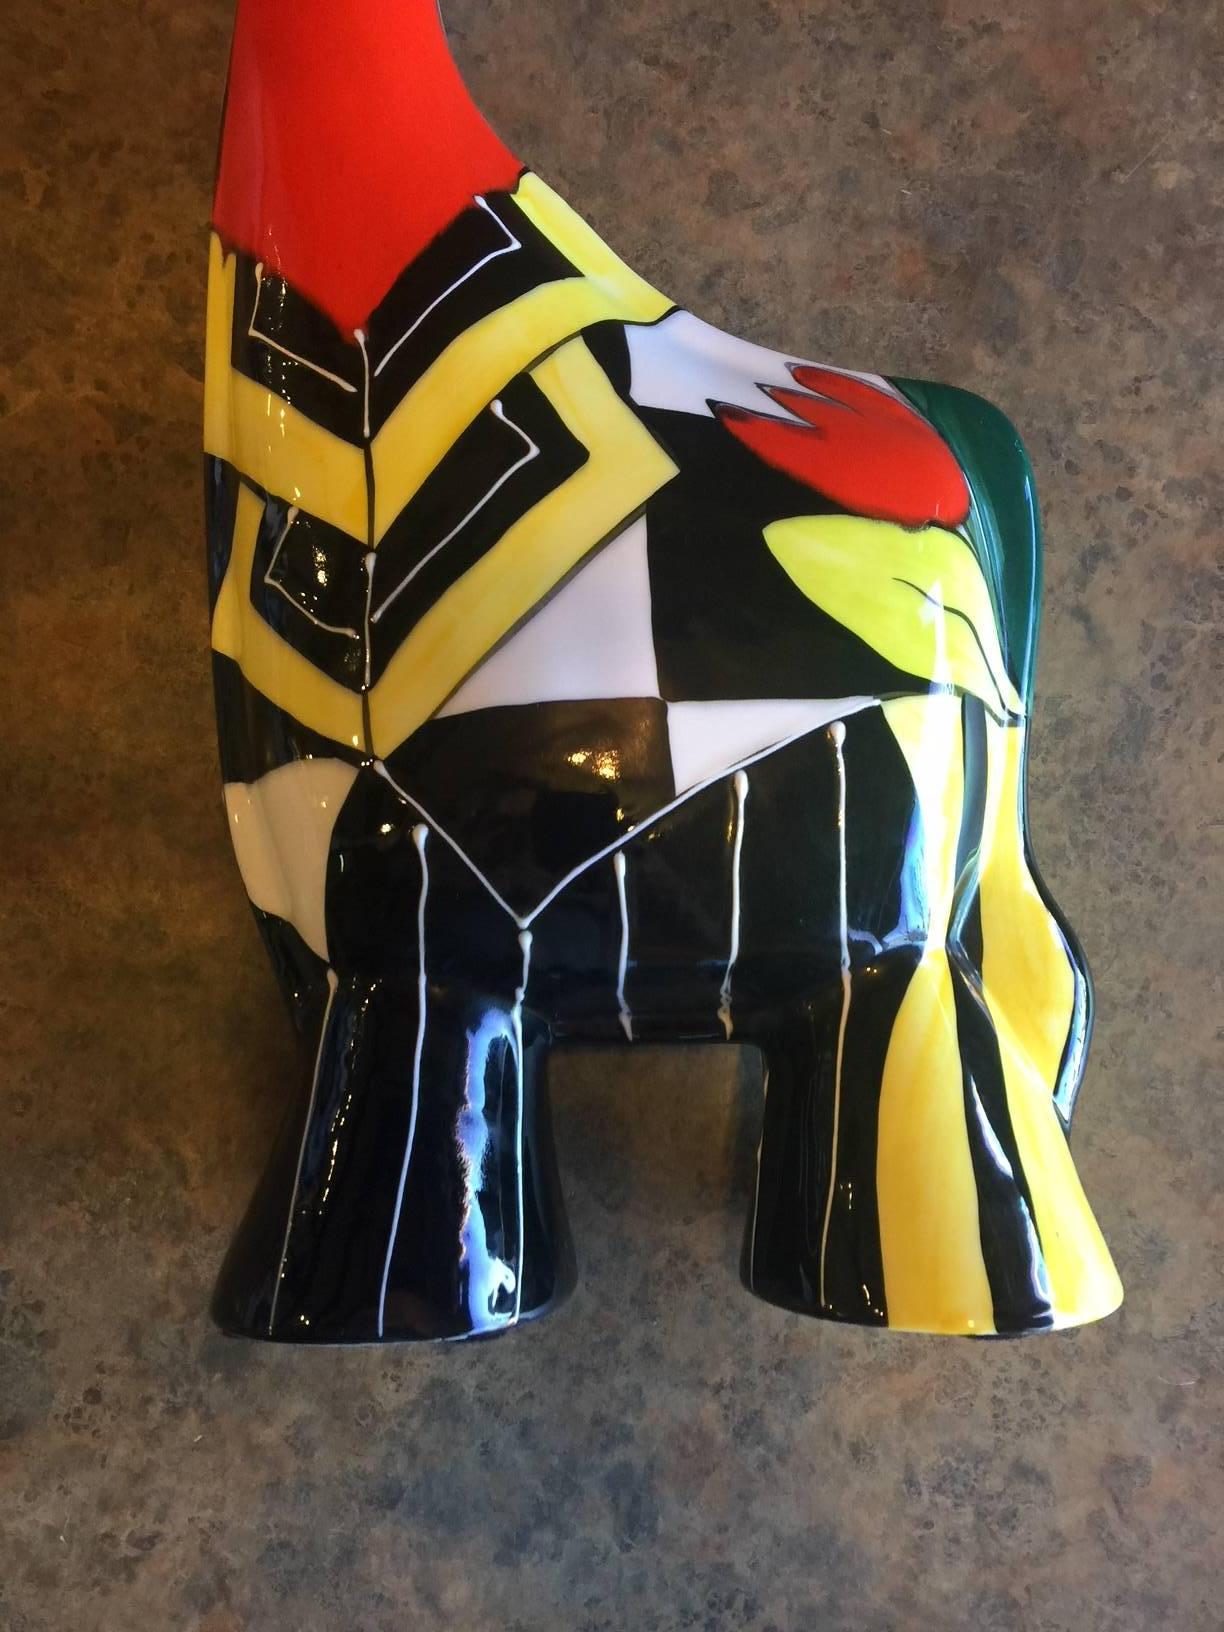 Colorful Ceramic Giraffe by Turov Art of Russia In Excellent Condition For Sale In San Diego, CA